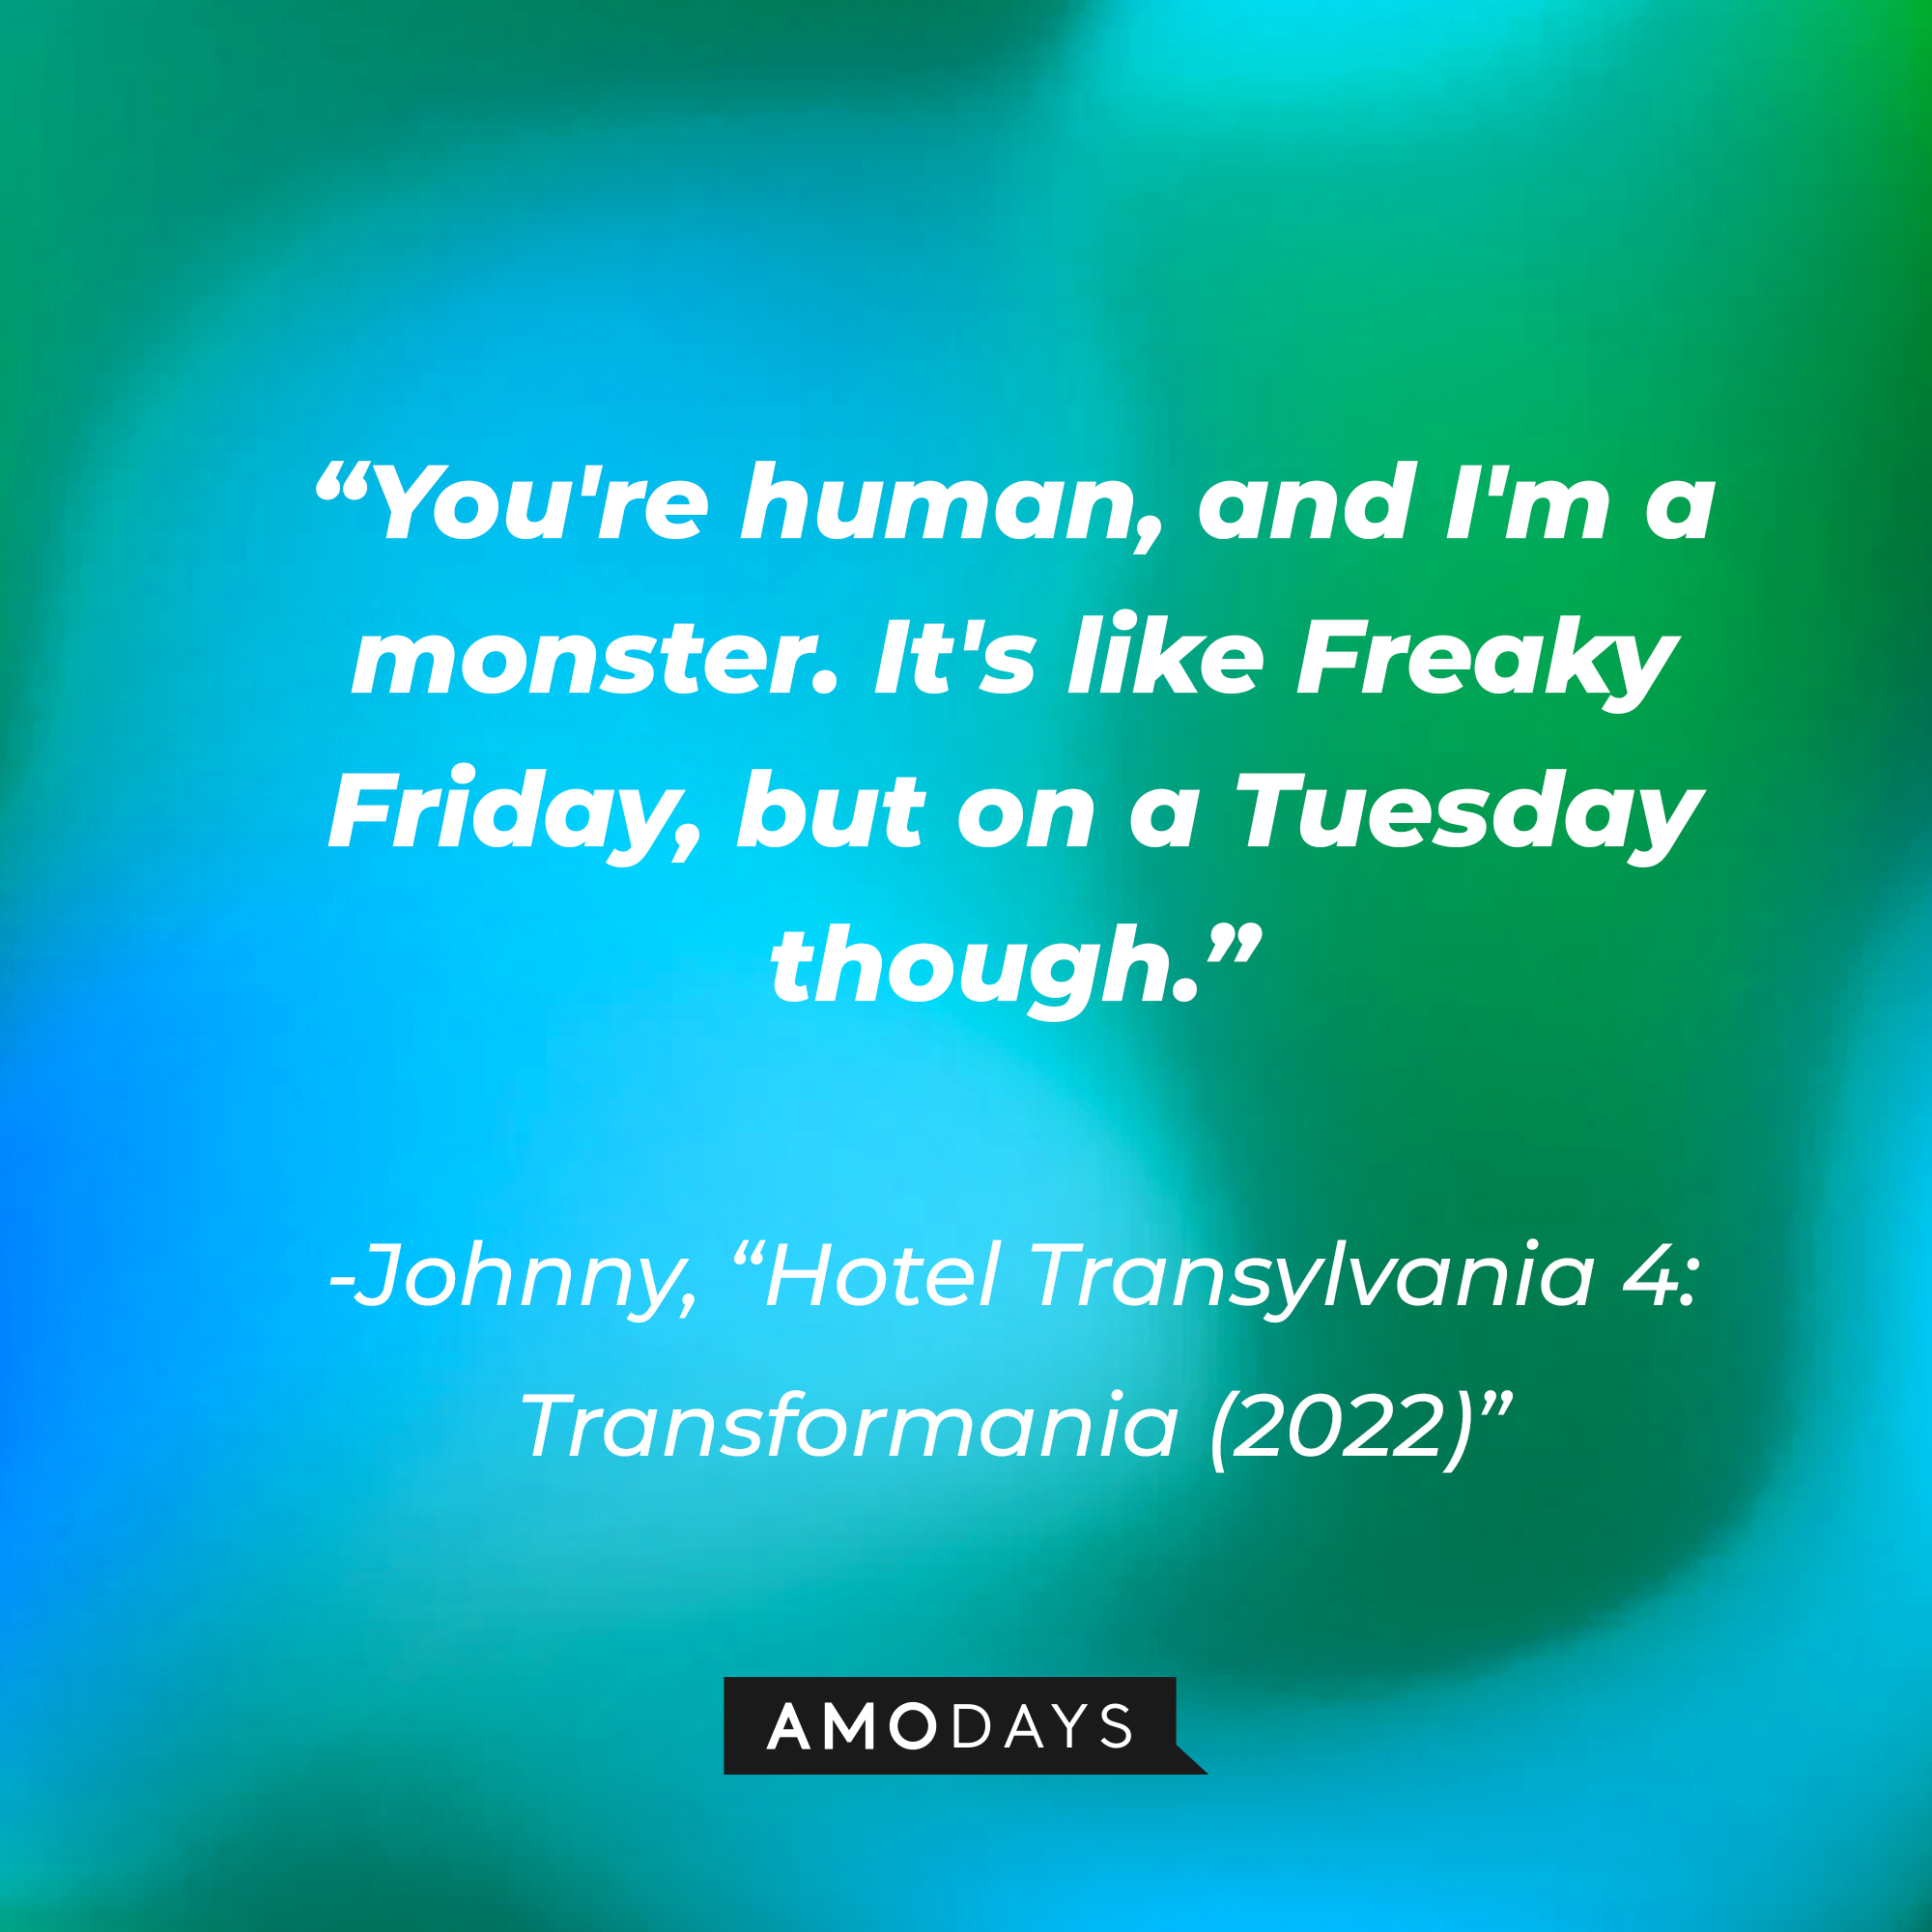 Johnny's quote: "You're human, and I'm a monster. It's like Freaky Friday, but on a Tuesday though." | Source: Amodays